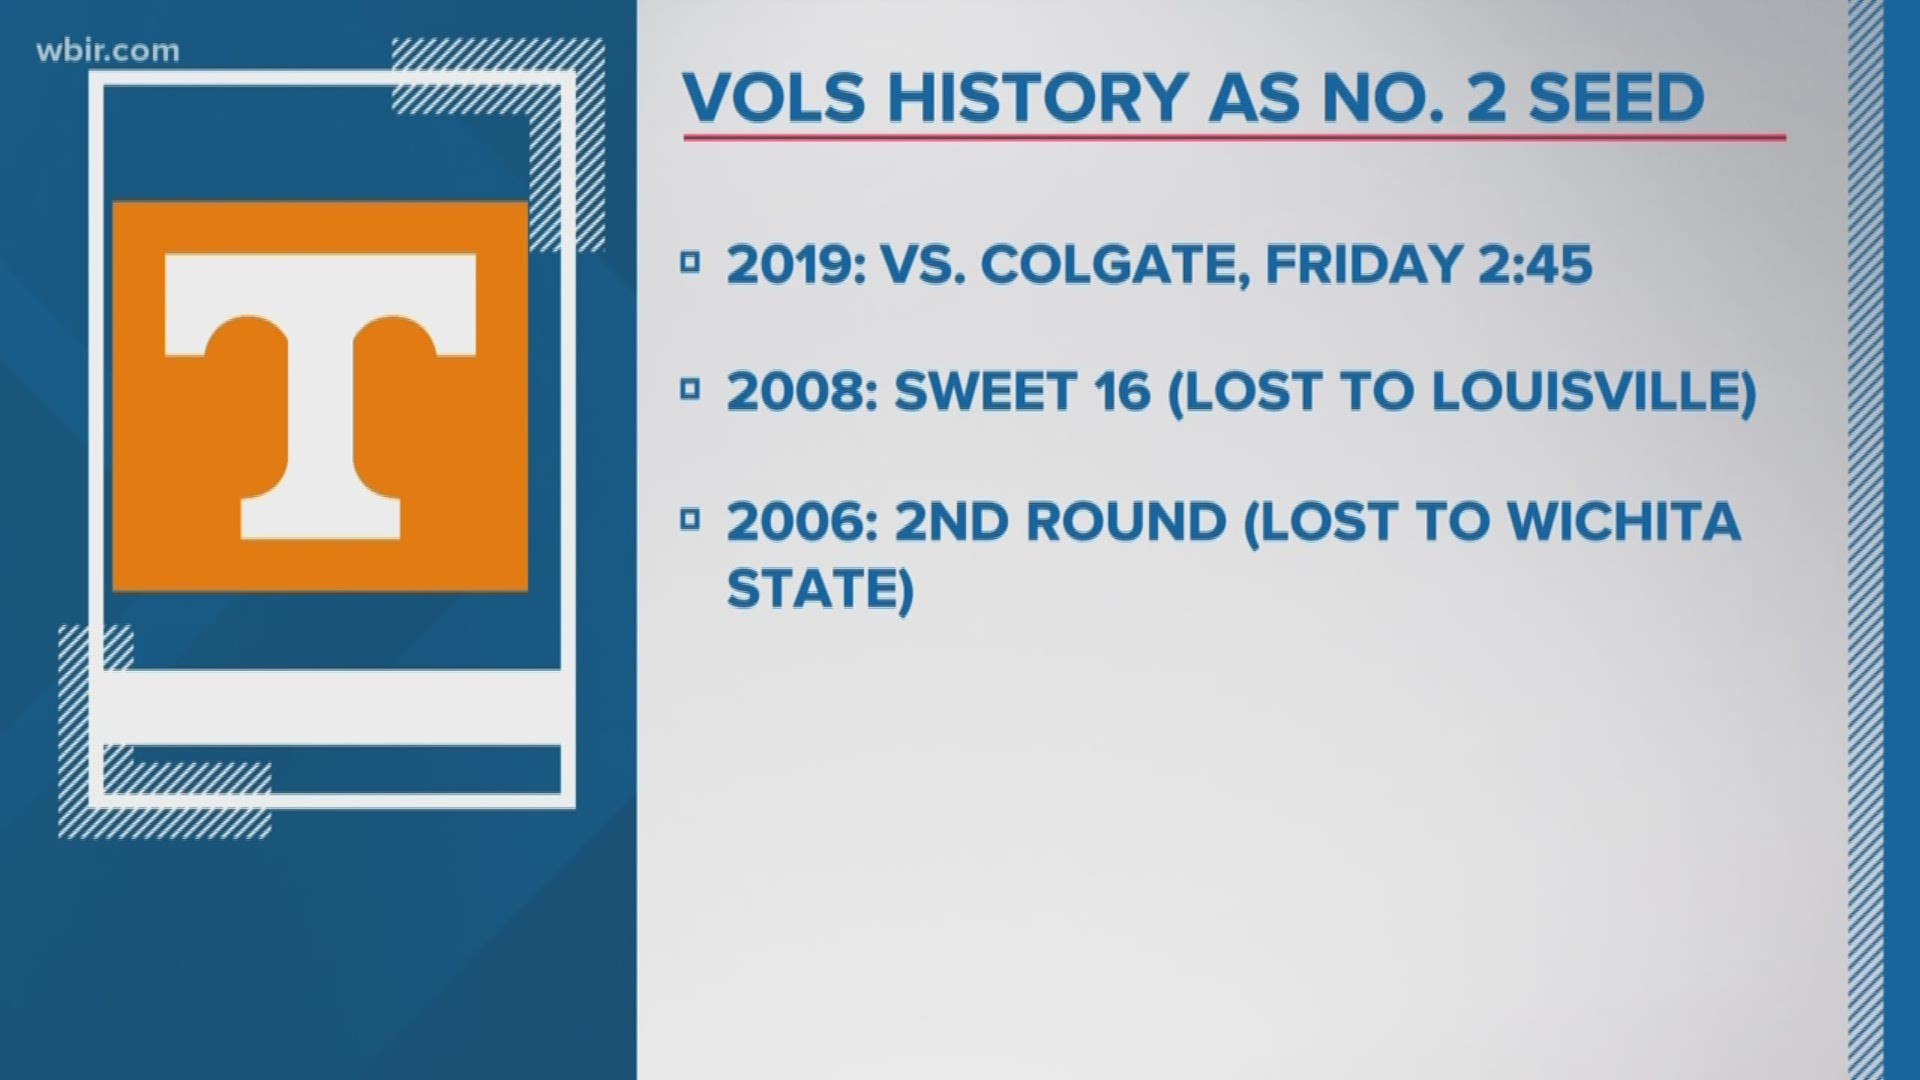 The Vols were the no. 5 team in the selection committee's overall rankings making them the top two-seed in the tournament.